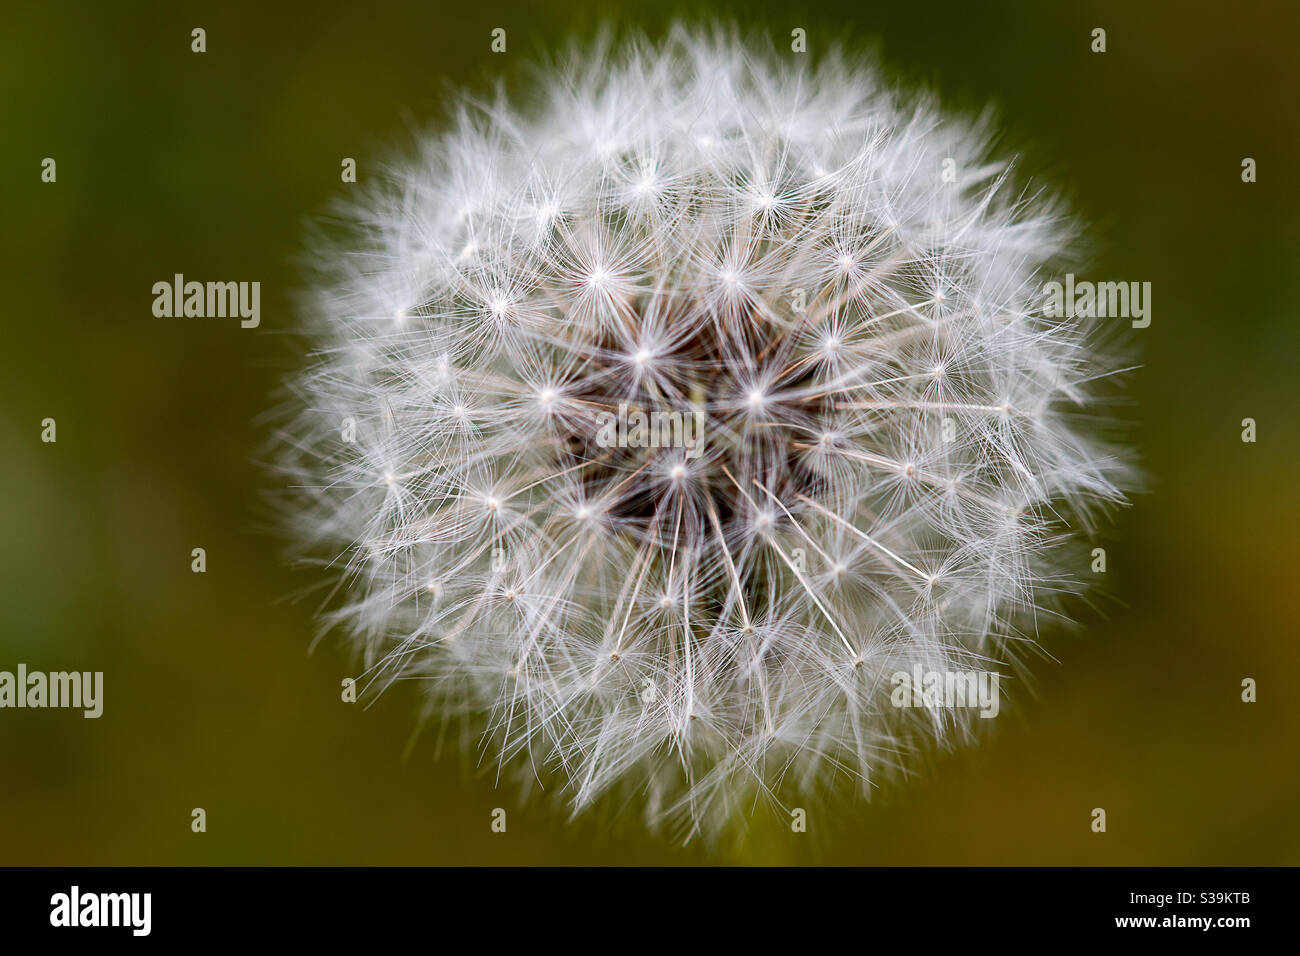 Dandelion from above. the flower is ripe and forms the typical round ball of fine white seeds reminiscent of parachutes. everything in front of a green blurred background Stock Photo